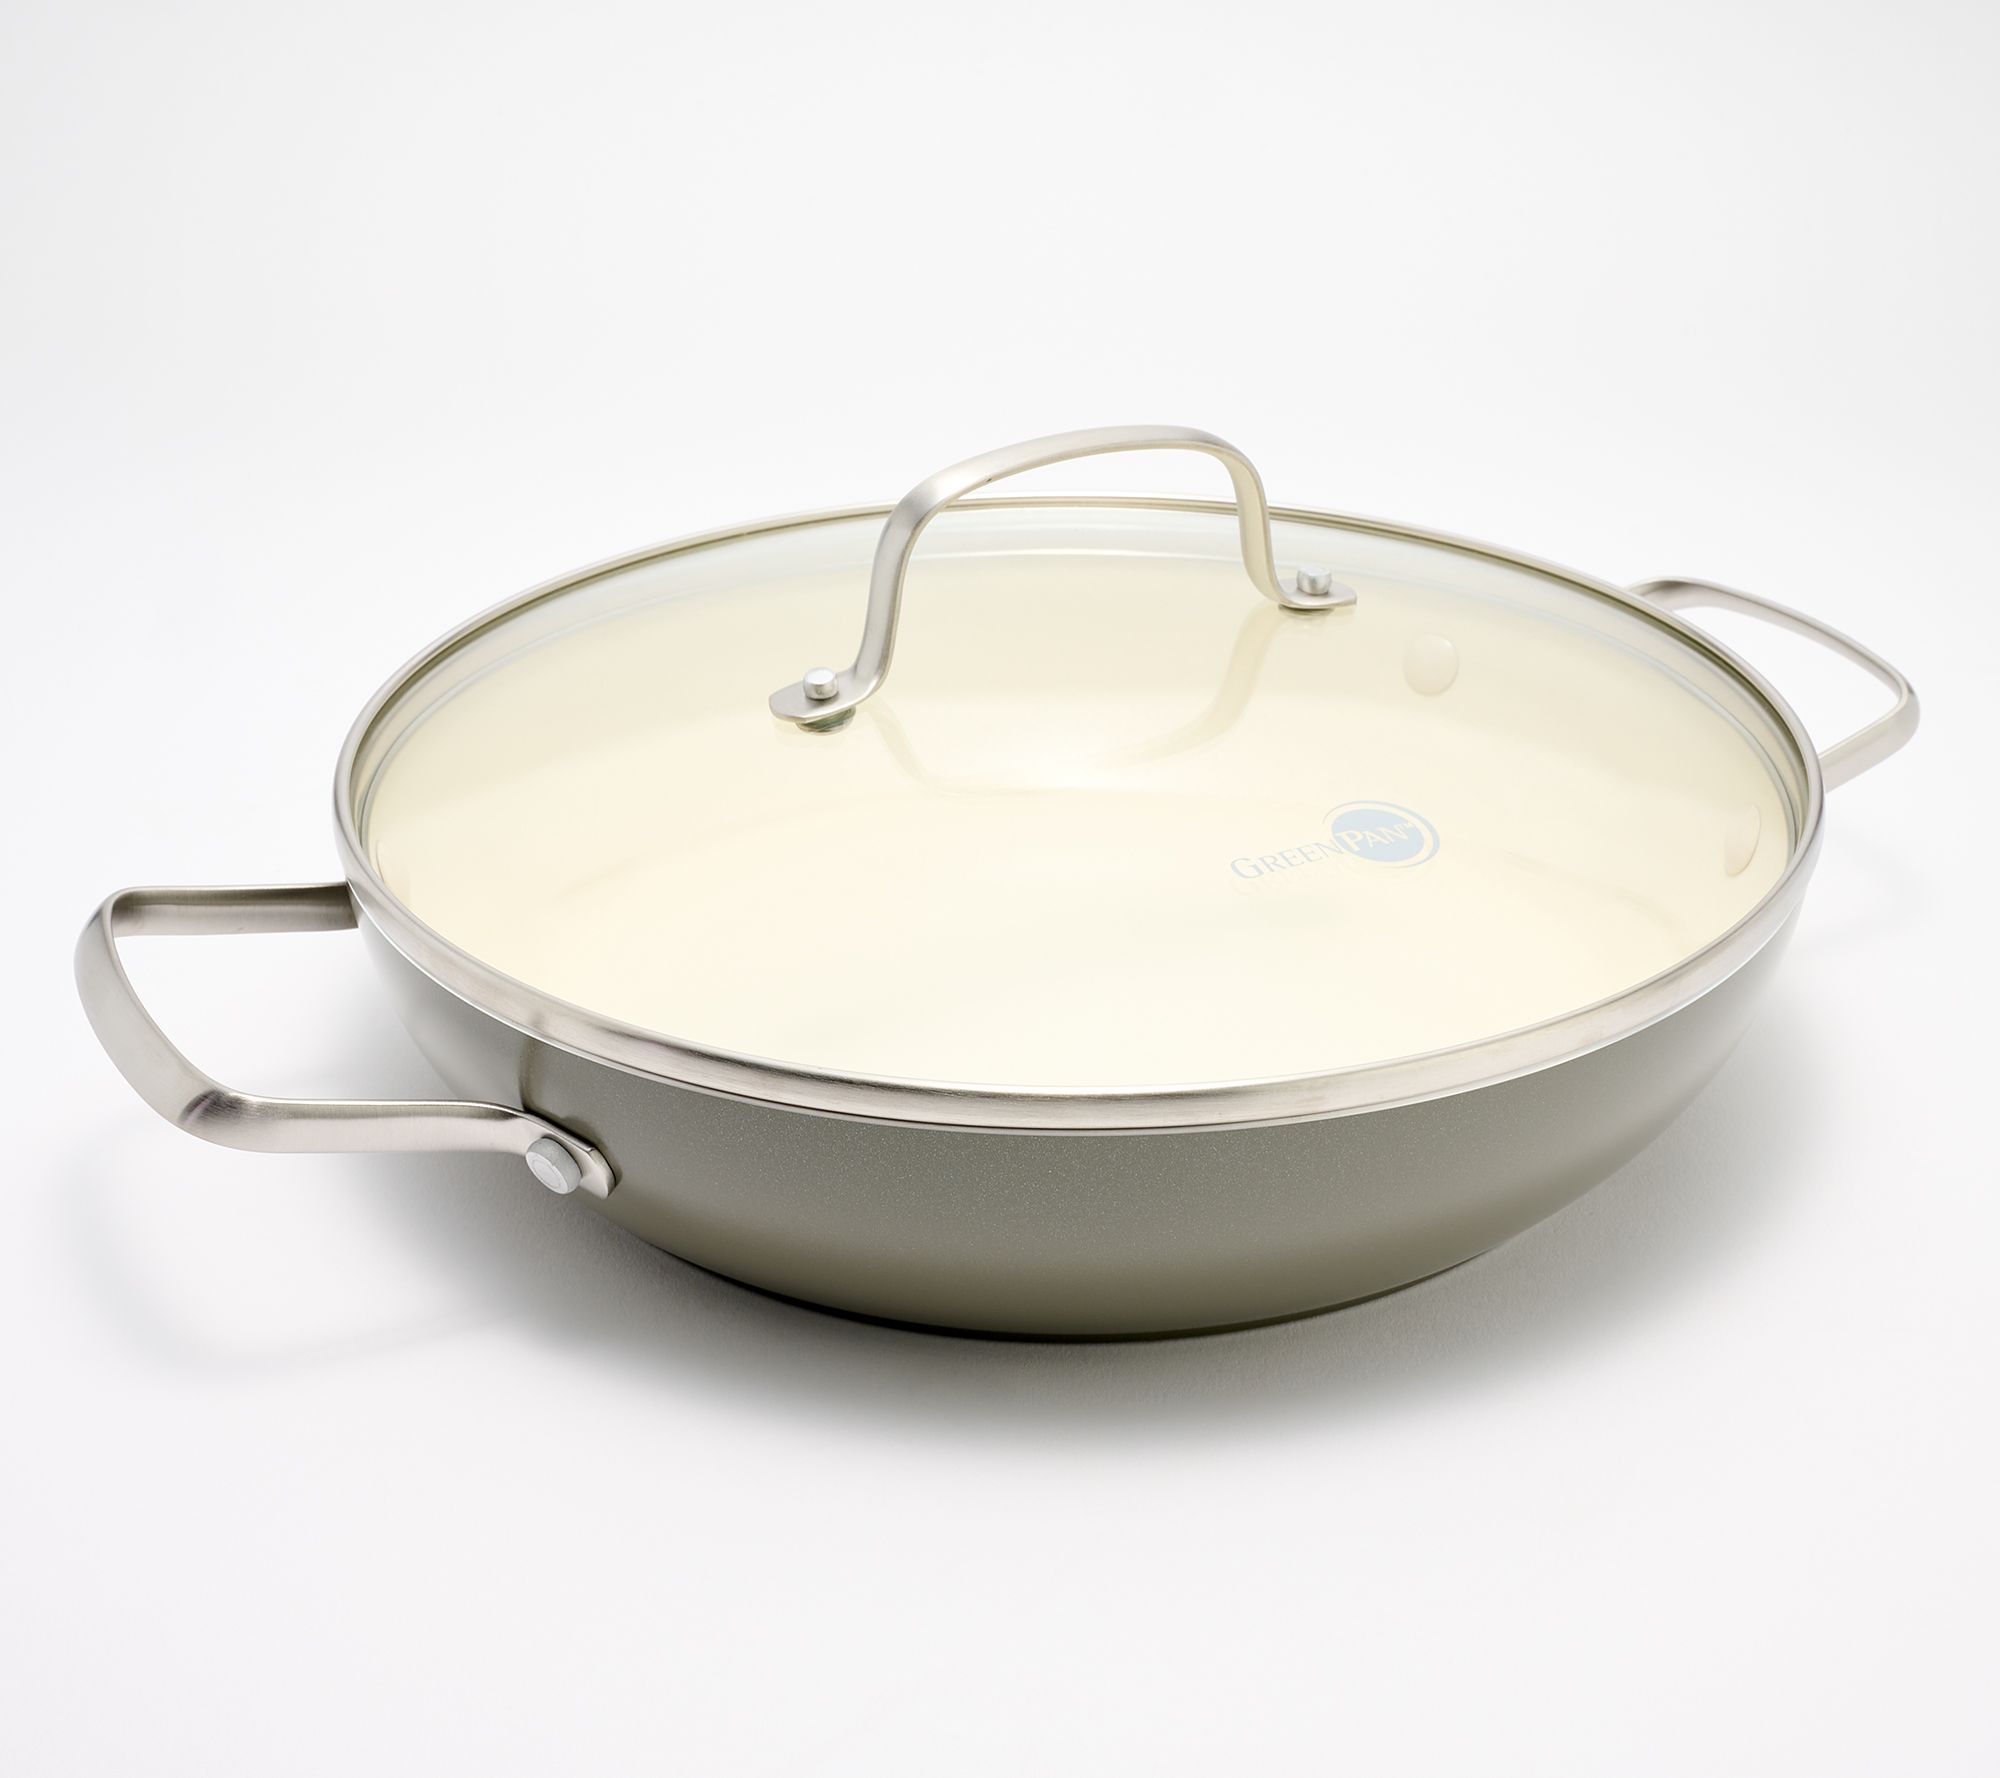 Le Creuset Enameled Cast Iron 11 Everyday Pan on QVC 